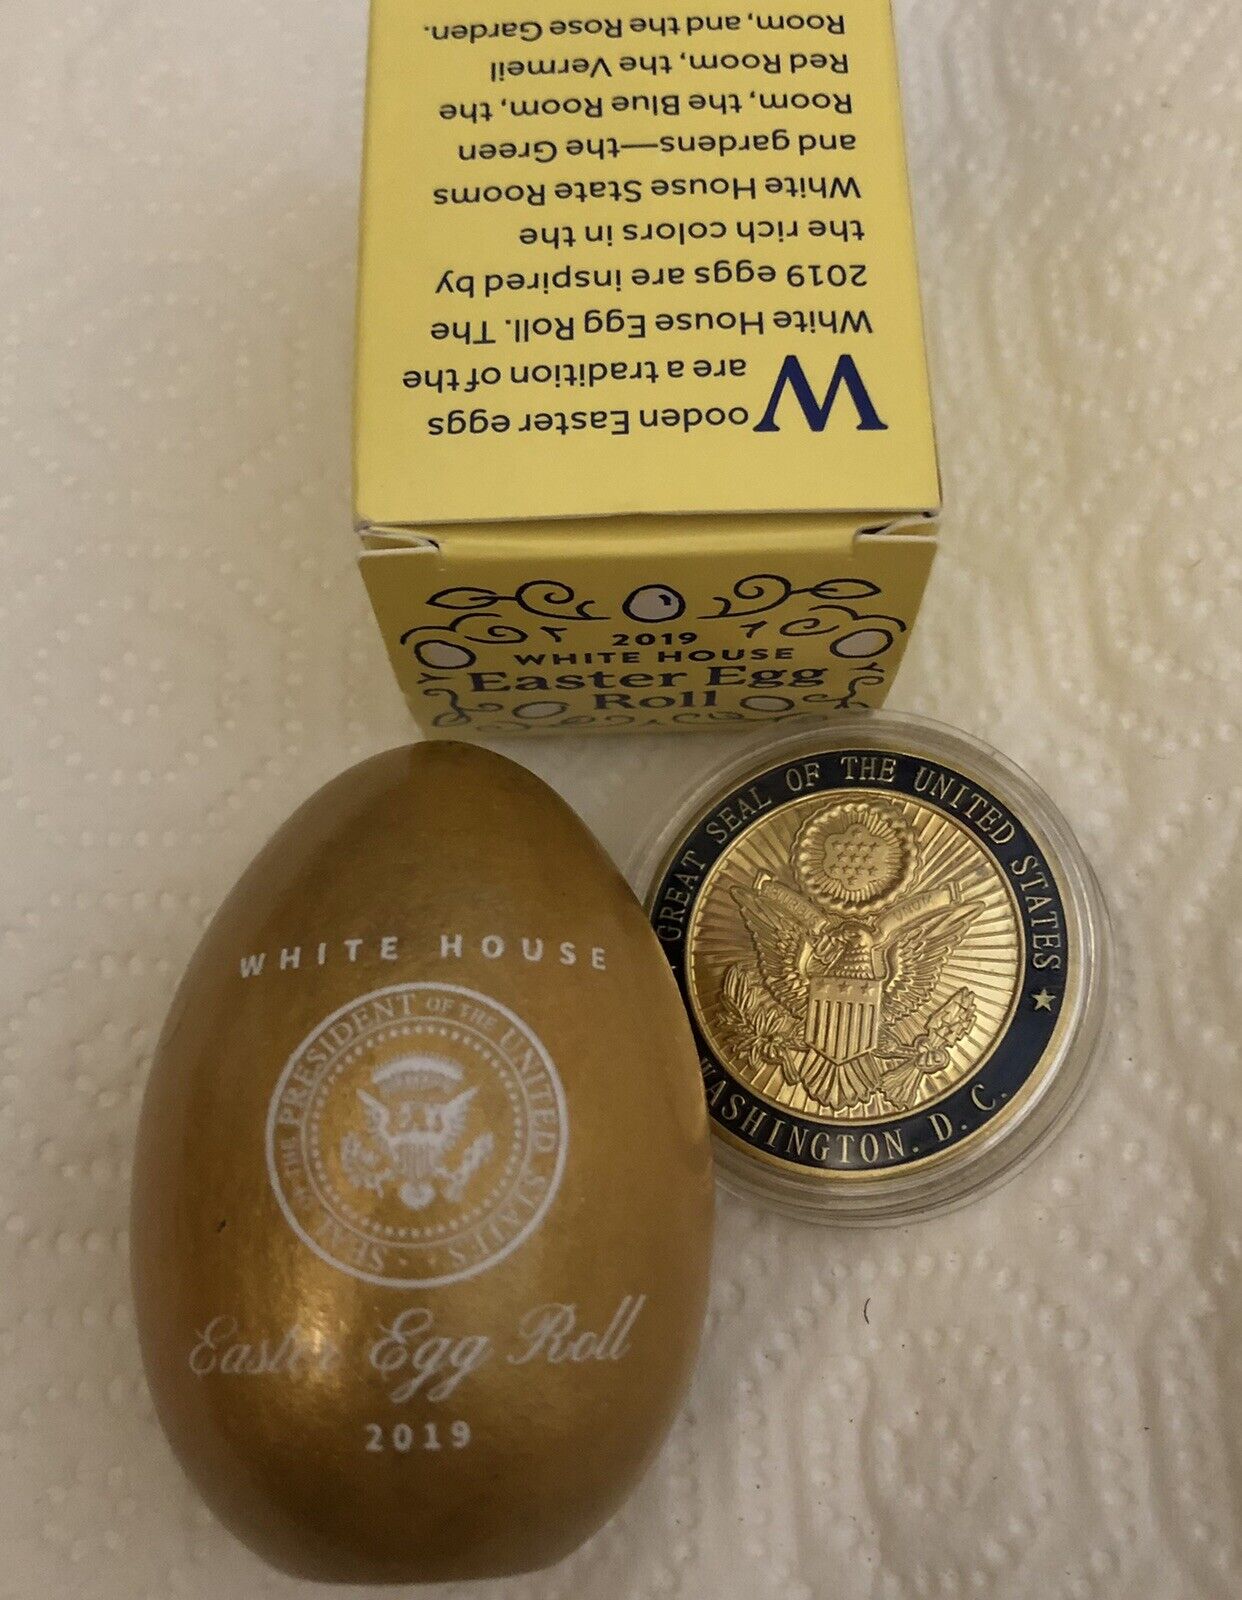 2 TRUMP = 2019 GOLD EASTER EGG + WHITE HOUSE CHALLENGE COIN EAGLE REPUBLICAN GOP